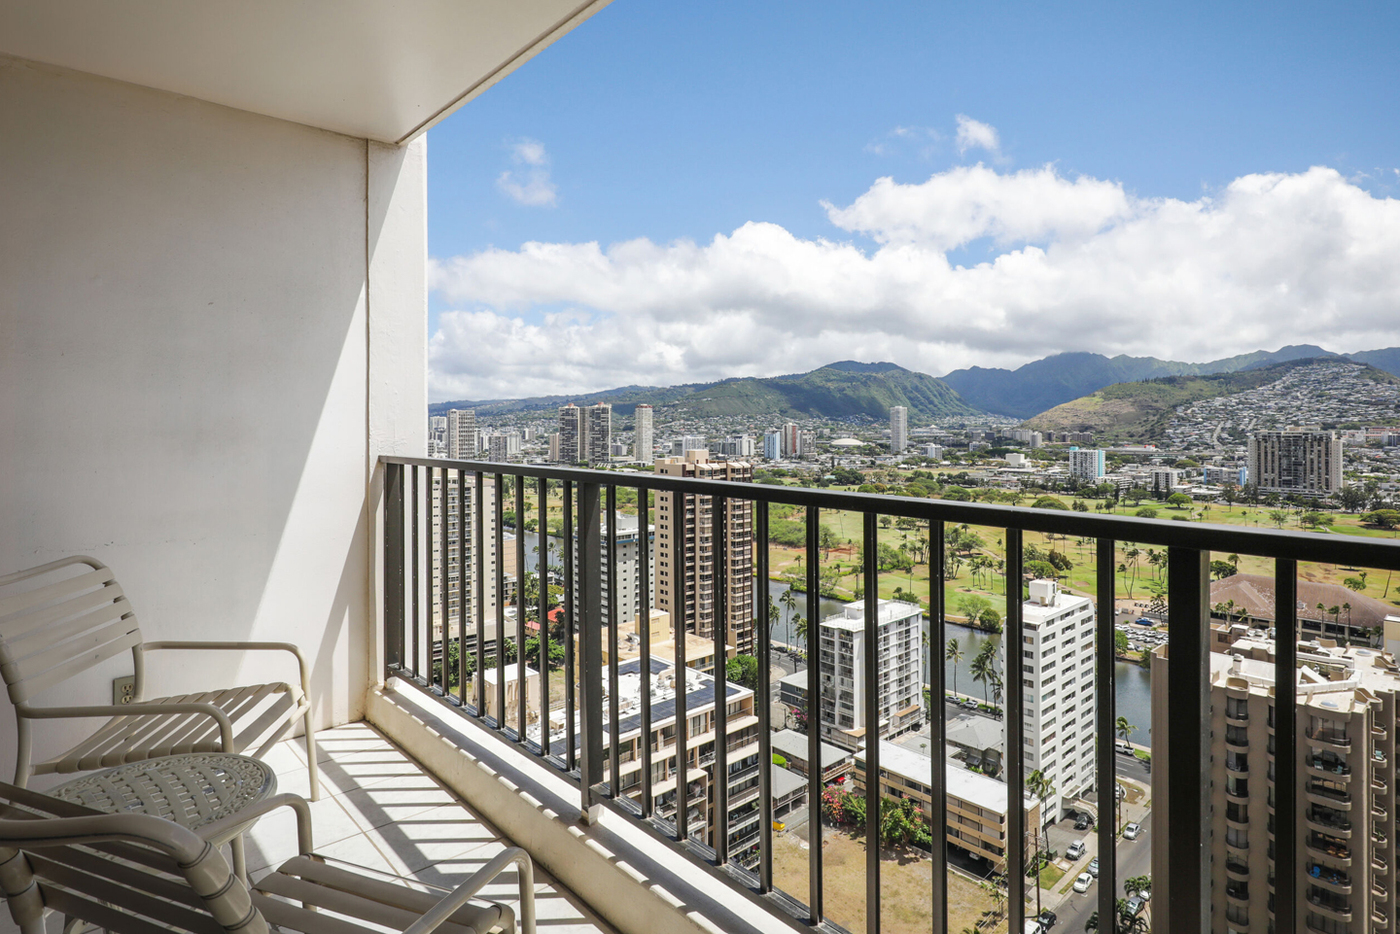 1-Bedroom Deluxe Mountain View with private balcony overlooking surrounding area.